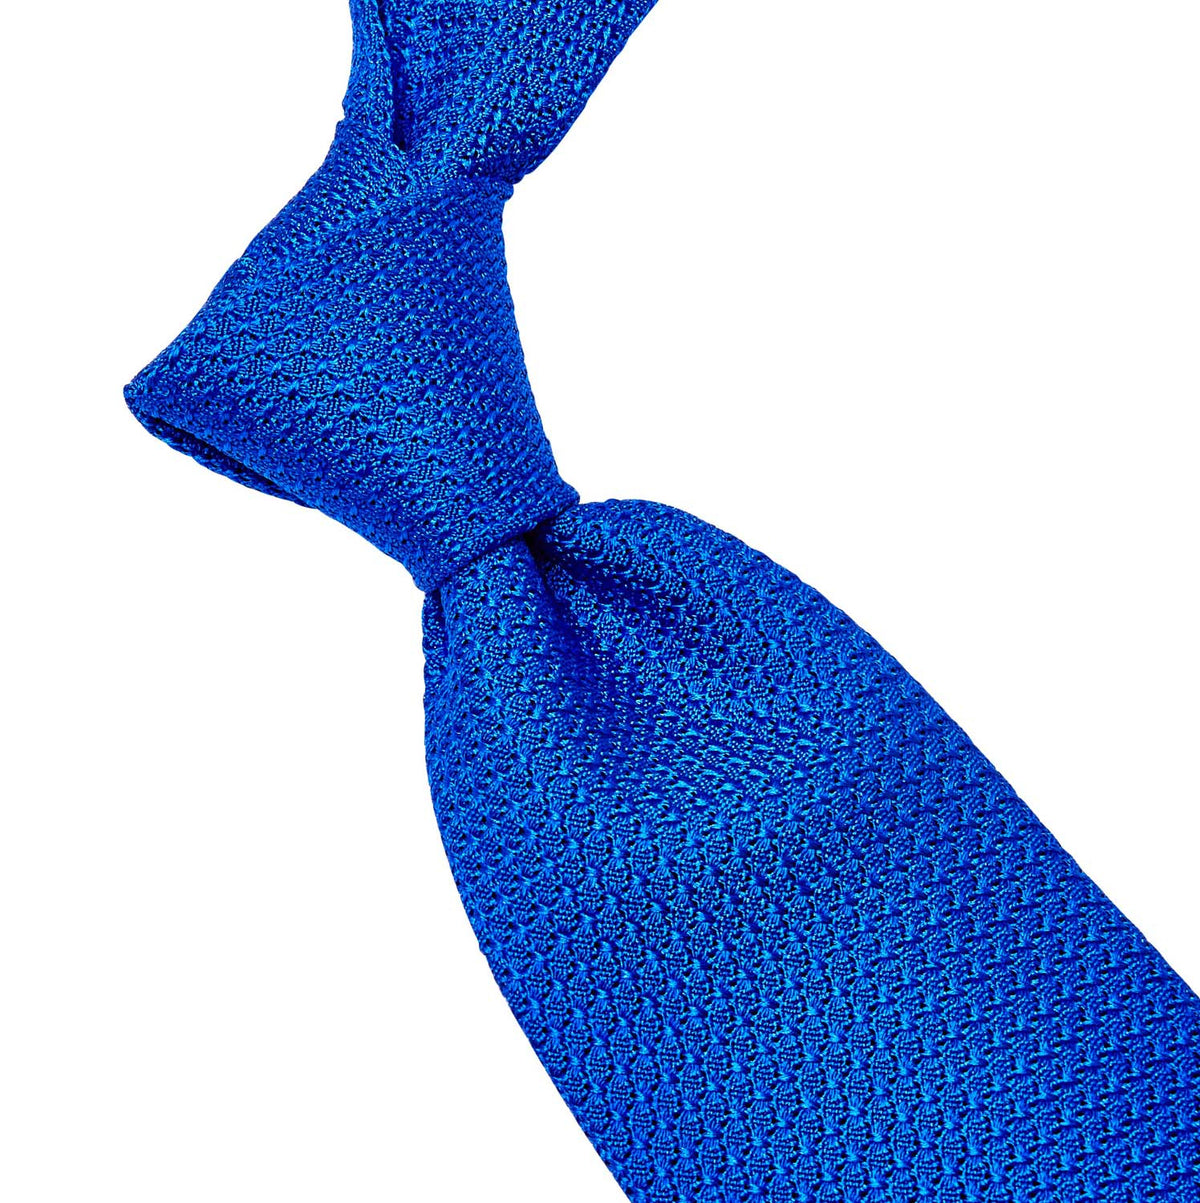 A Sovereign Grade Bright Blue Grenadine Grossa Tie by KirbyAllison.com, handmade in the United Kingdom from silk of longevity and quality on a white background.